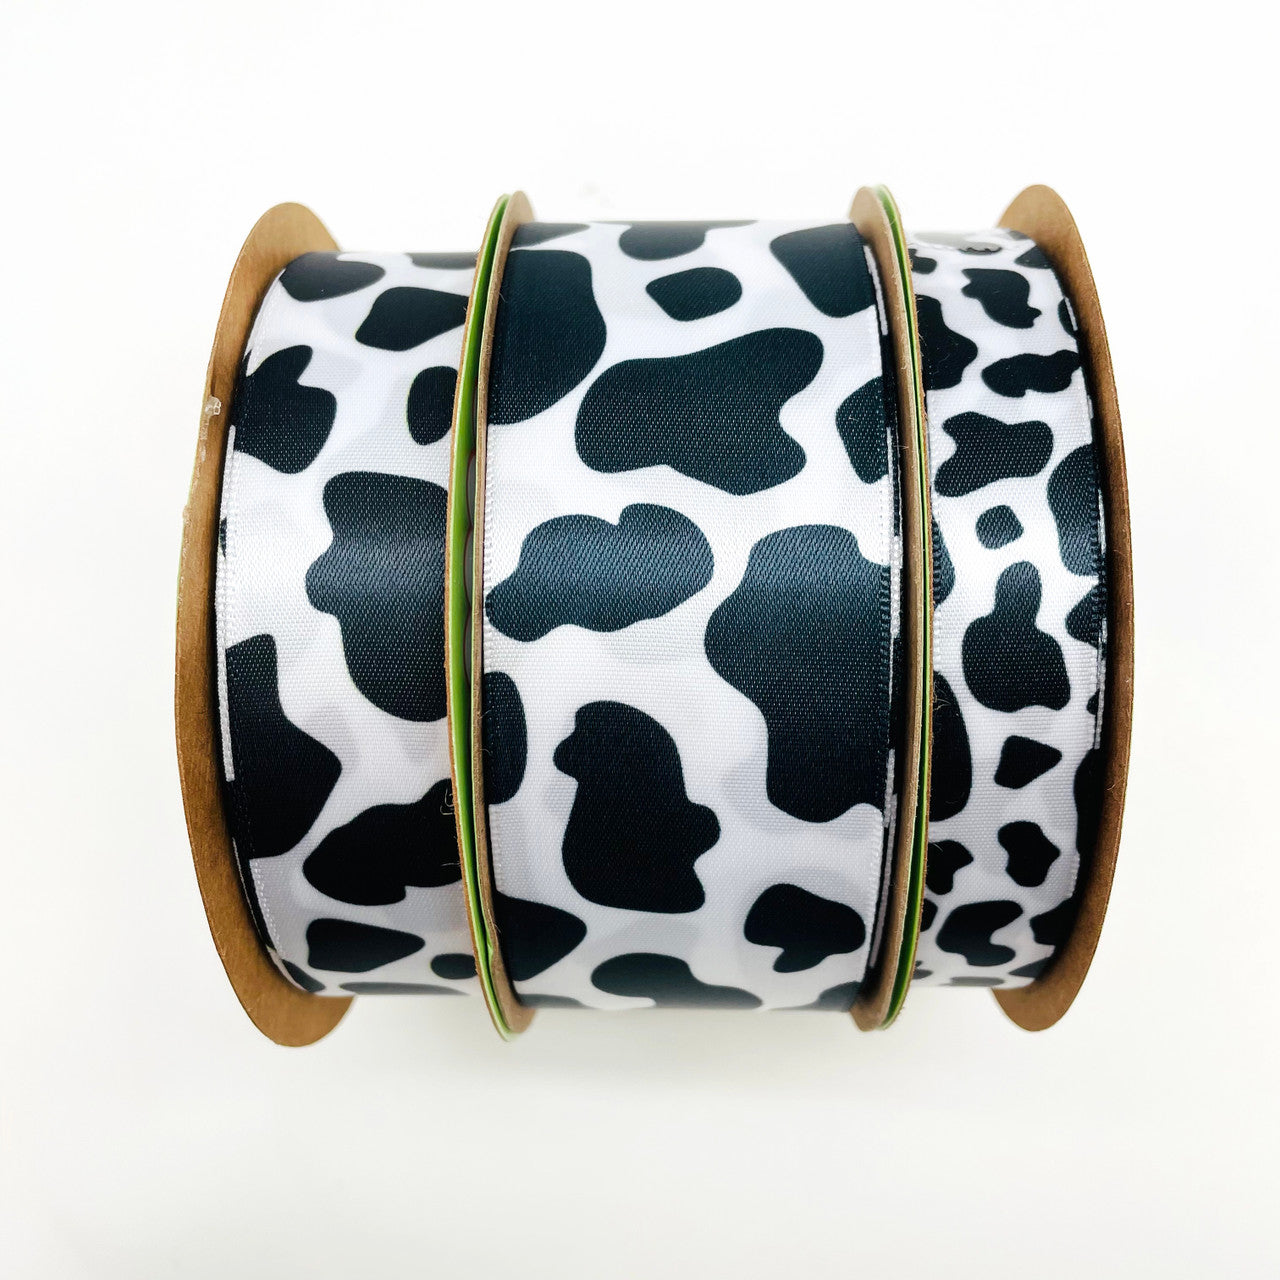 Cow pattern ribbon printed in black and white on 1.5 white single face  satin, 10 yards